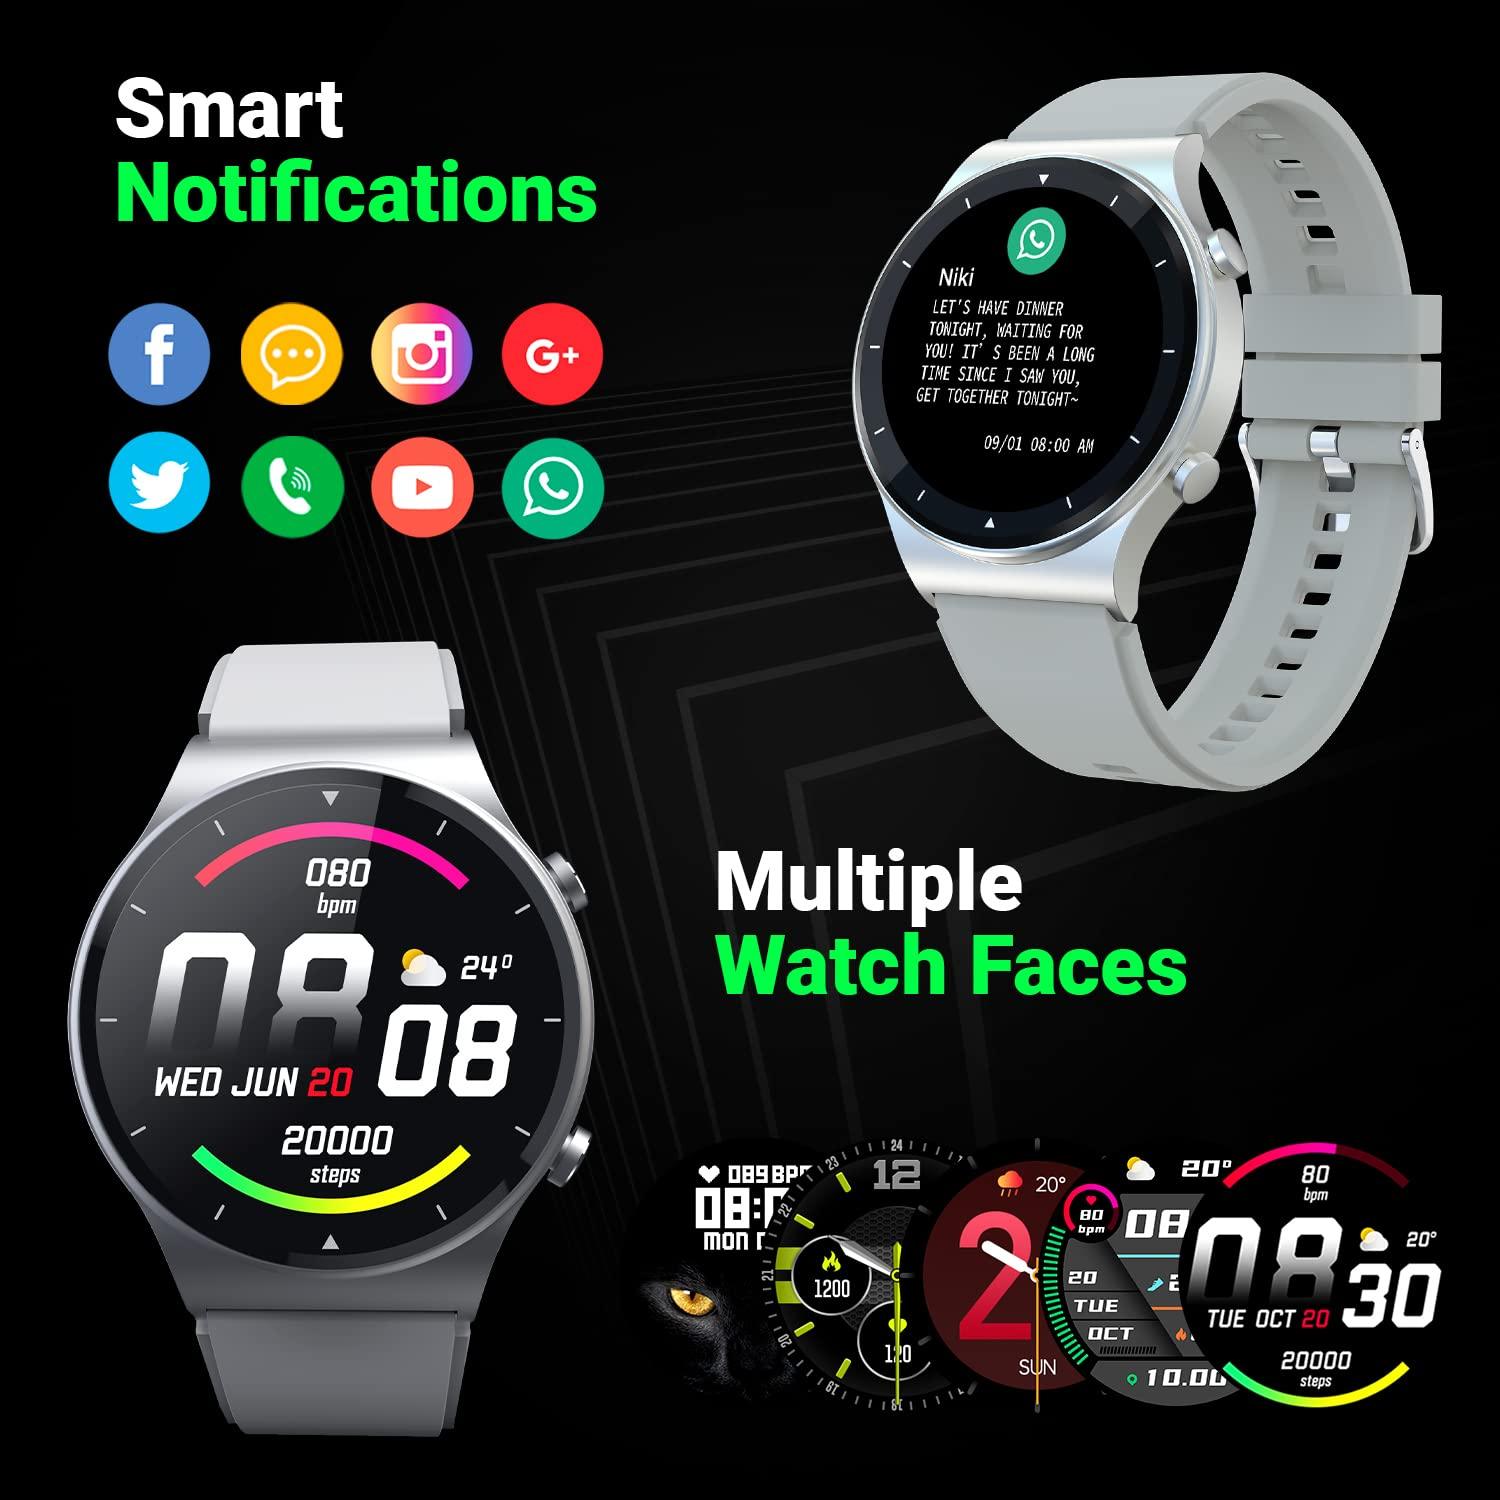 Fire-Boltt 360 Pro Bluetooth Calling, Local Music and TWS Pairing, 360*360 PRO Display Smart Watch with Rolling UI & Dual Button Technology, Spo2, Heart Rate - Silver, Large (BSW017) - A - onBeli